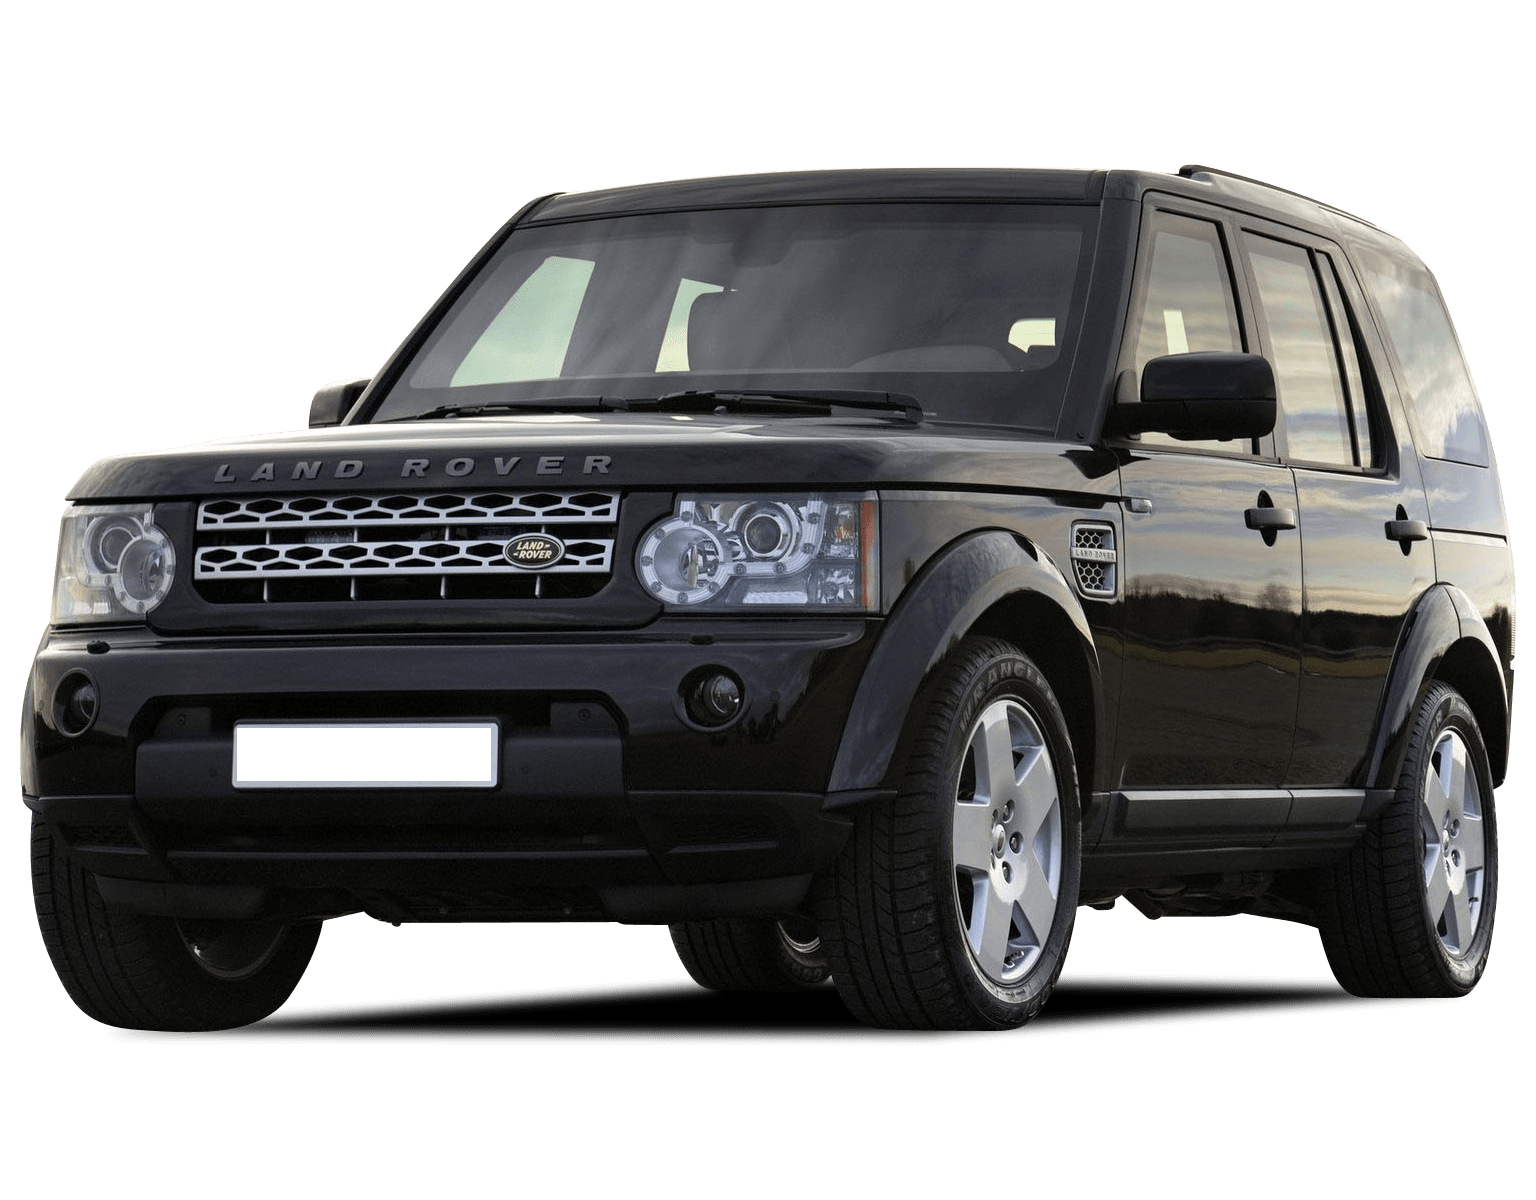 Land Rover Discovery 4 Sale, Specs, Models & News in Australia CarsGuide